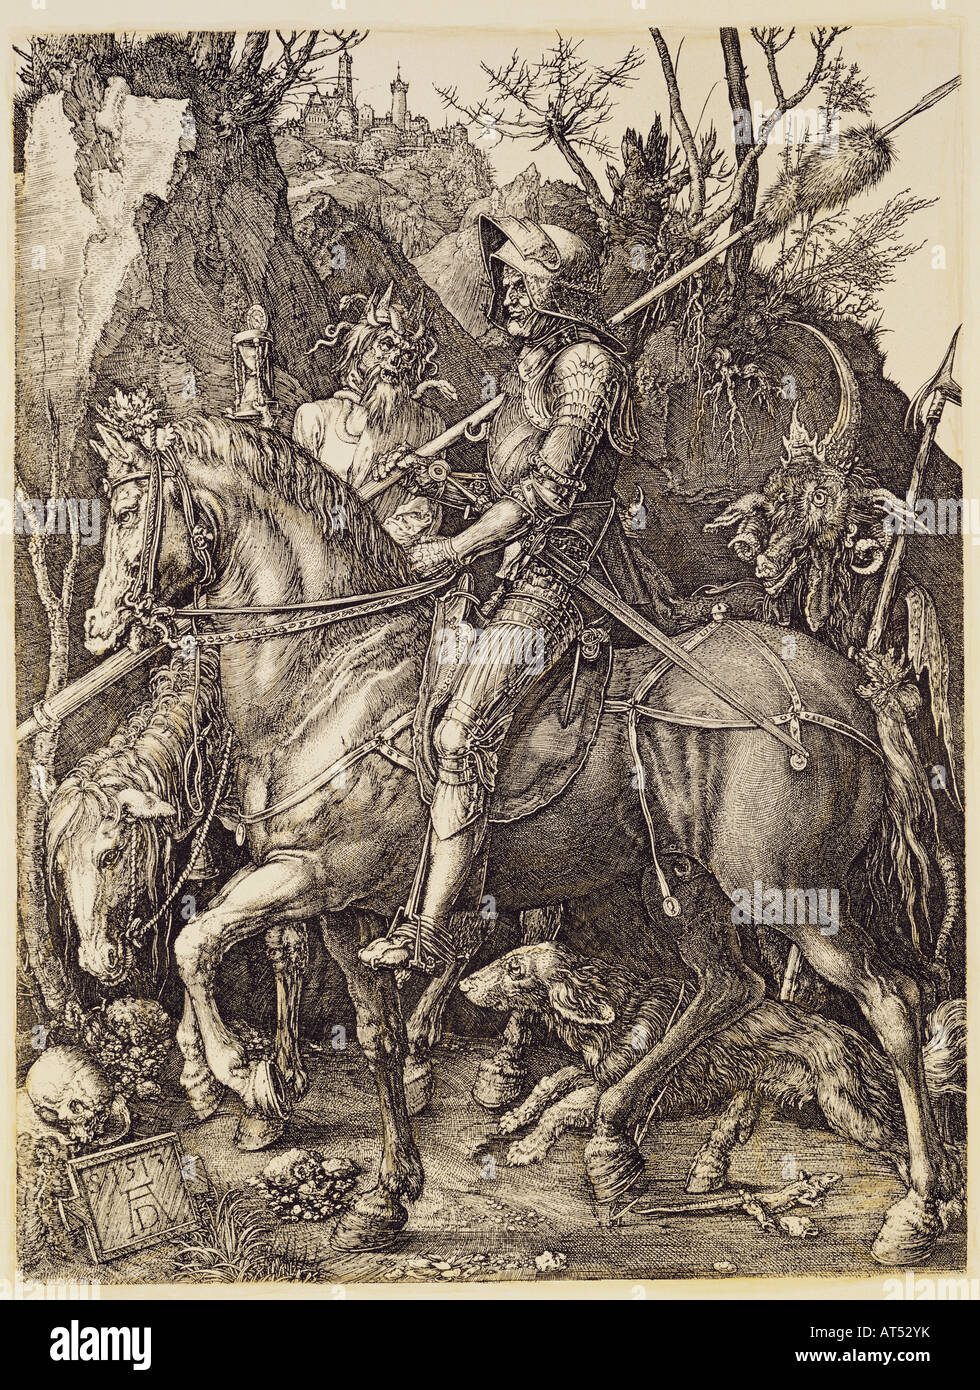 fine arts, Durer, Albrecht (1471 - 1528), copper engraving, "Ritter, Tod und Teufel" (Knight, death and devil), 1513, 24.4 cm x 18.9 cm, private collection, Artist's Copyright has not to be cleared Stock Photo